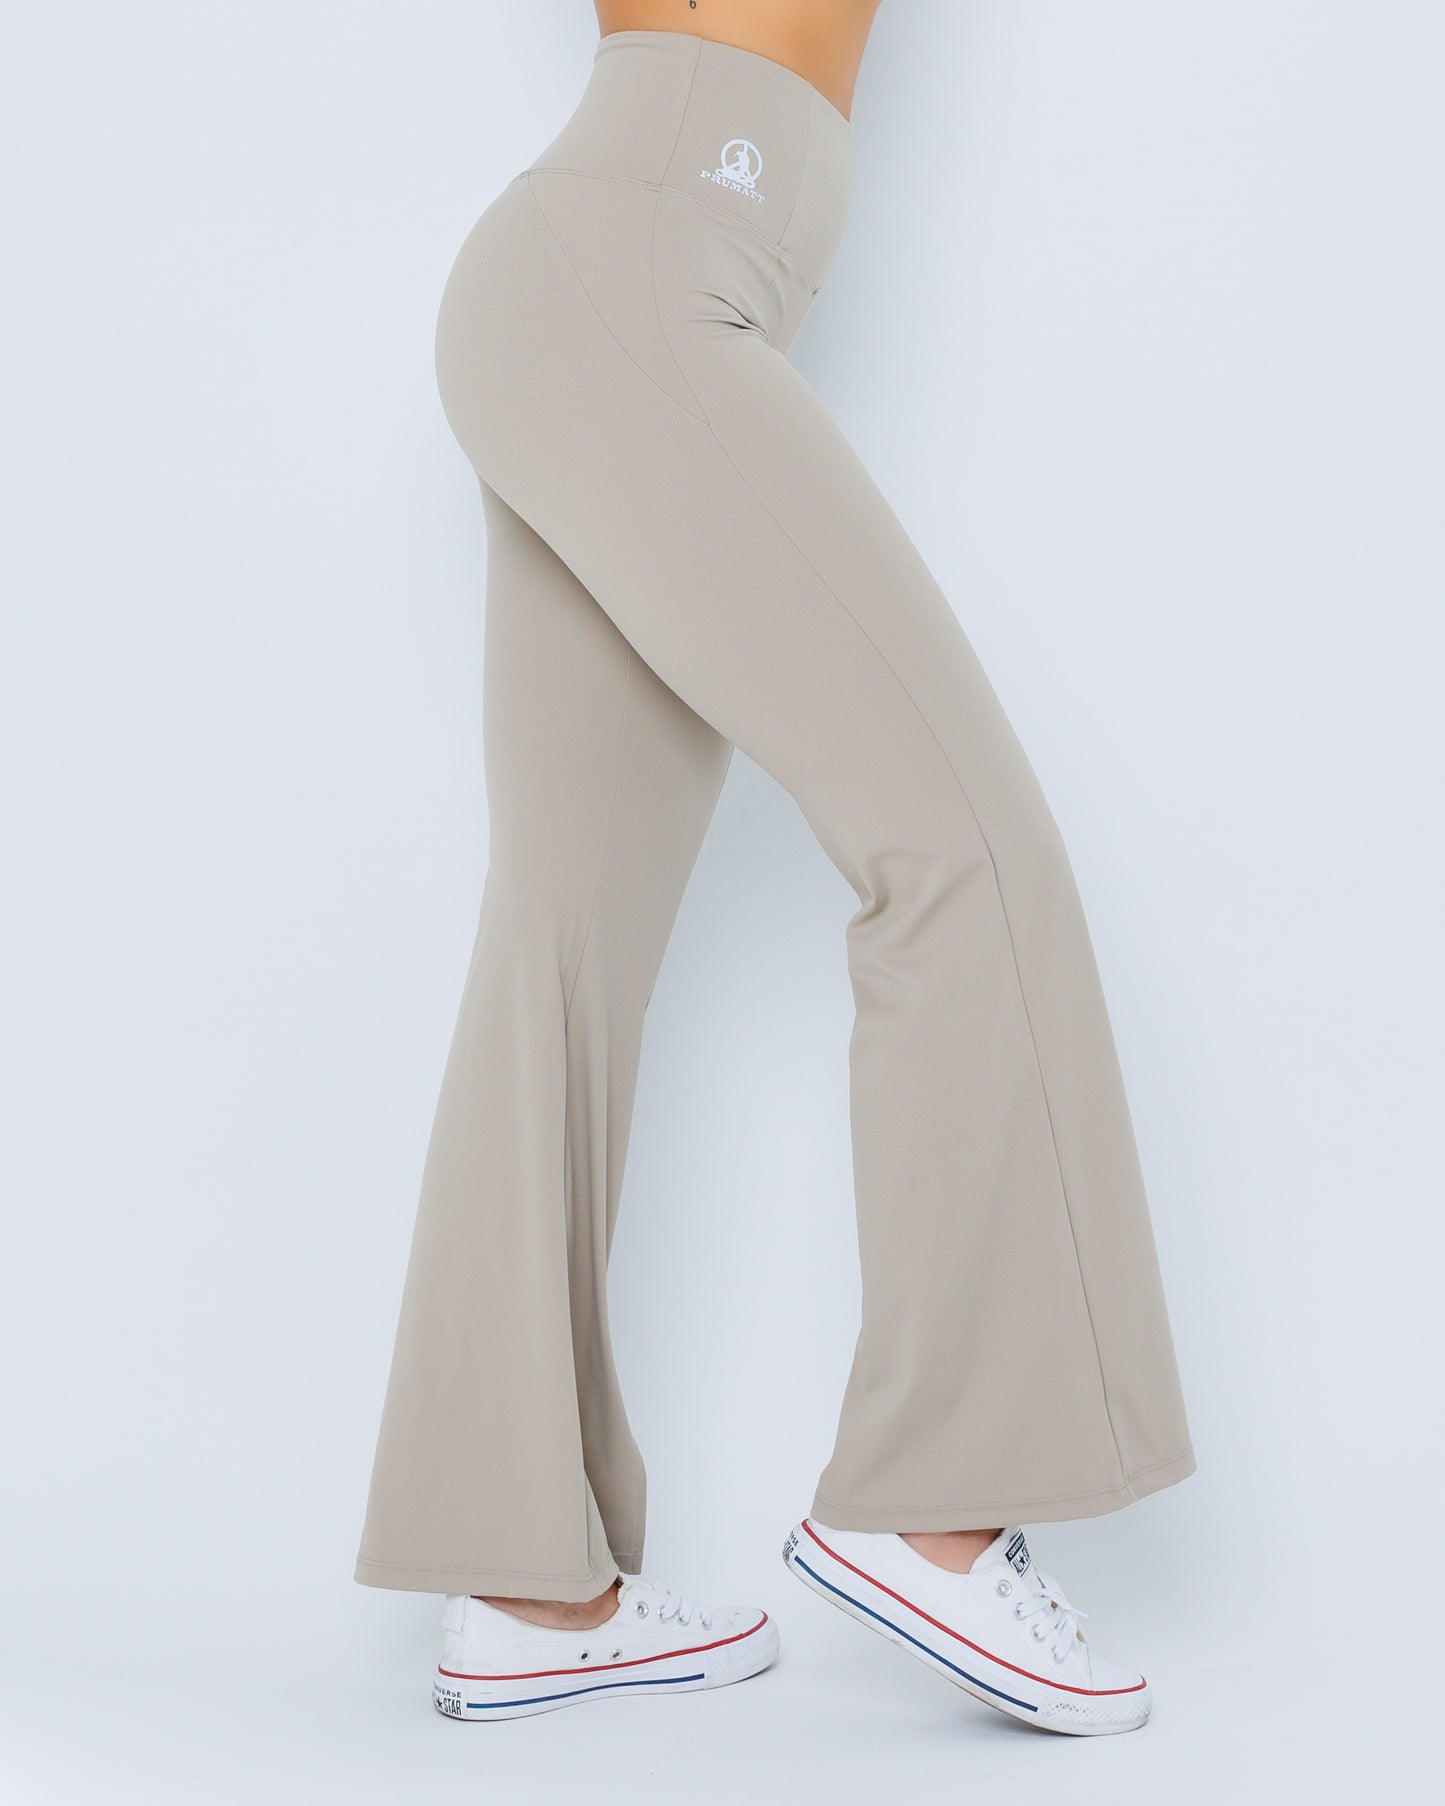 PEACE - Flared Trousers- CAMEL BROWN